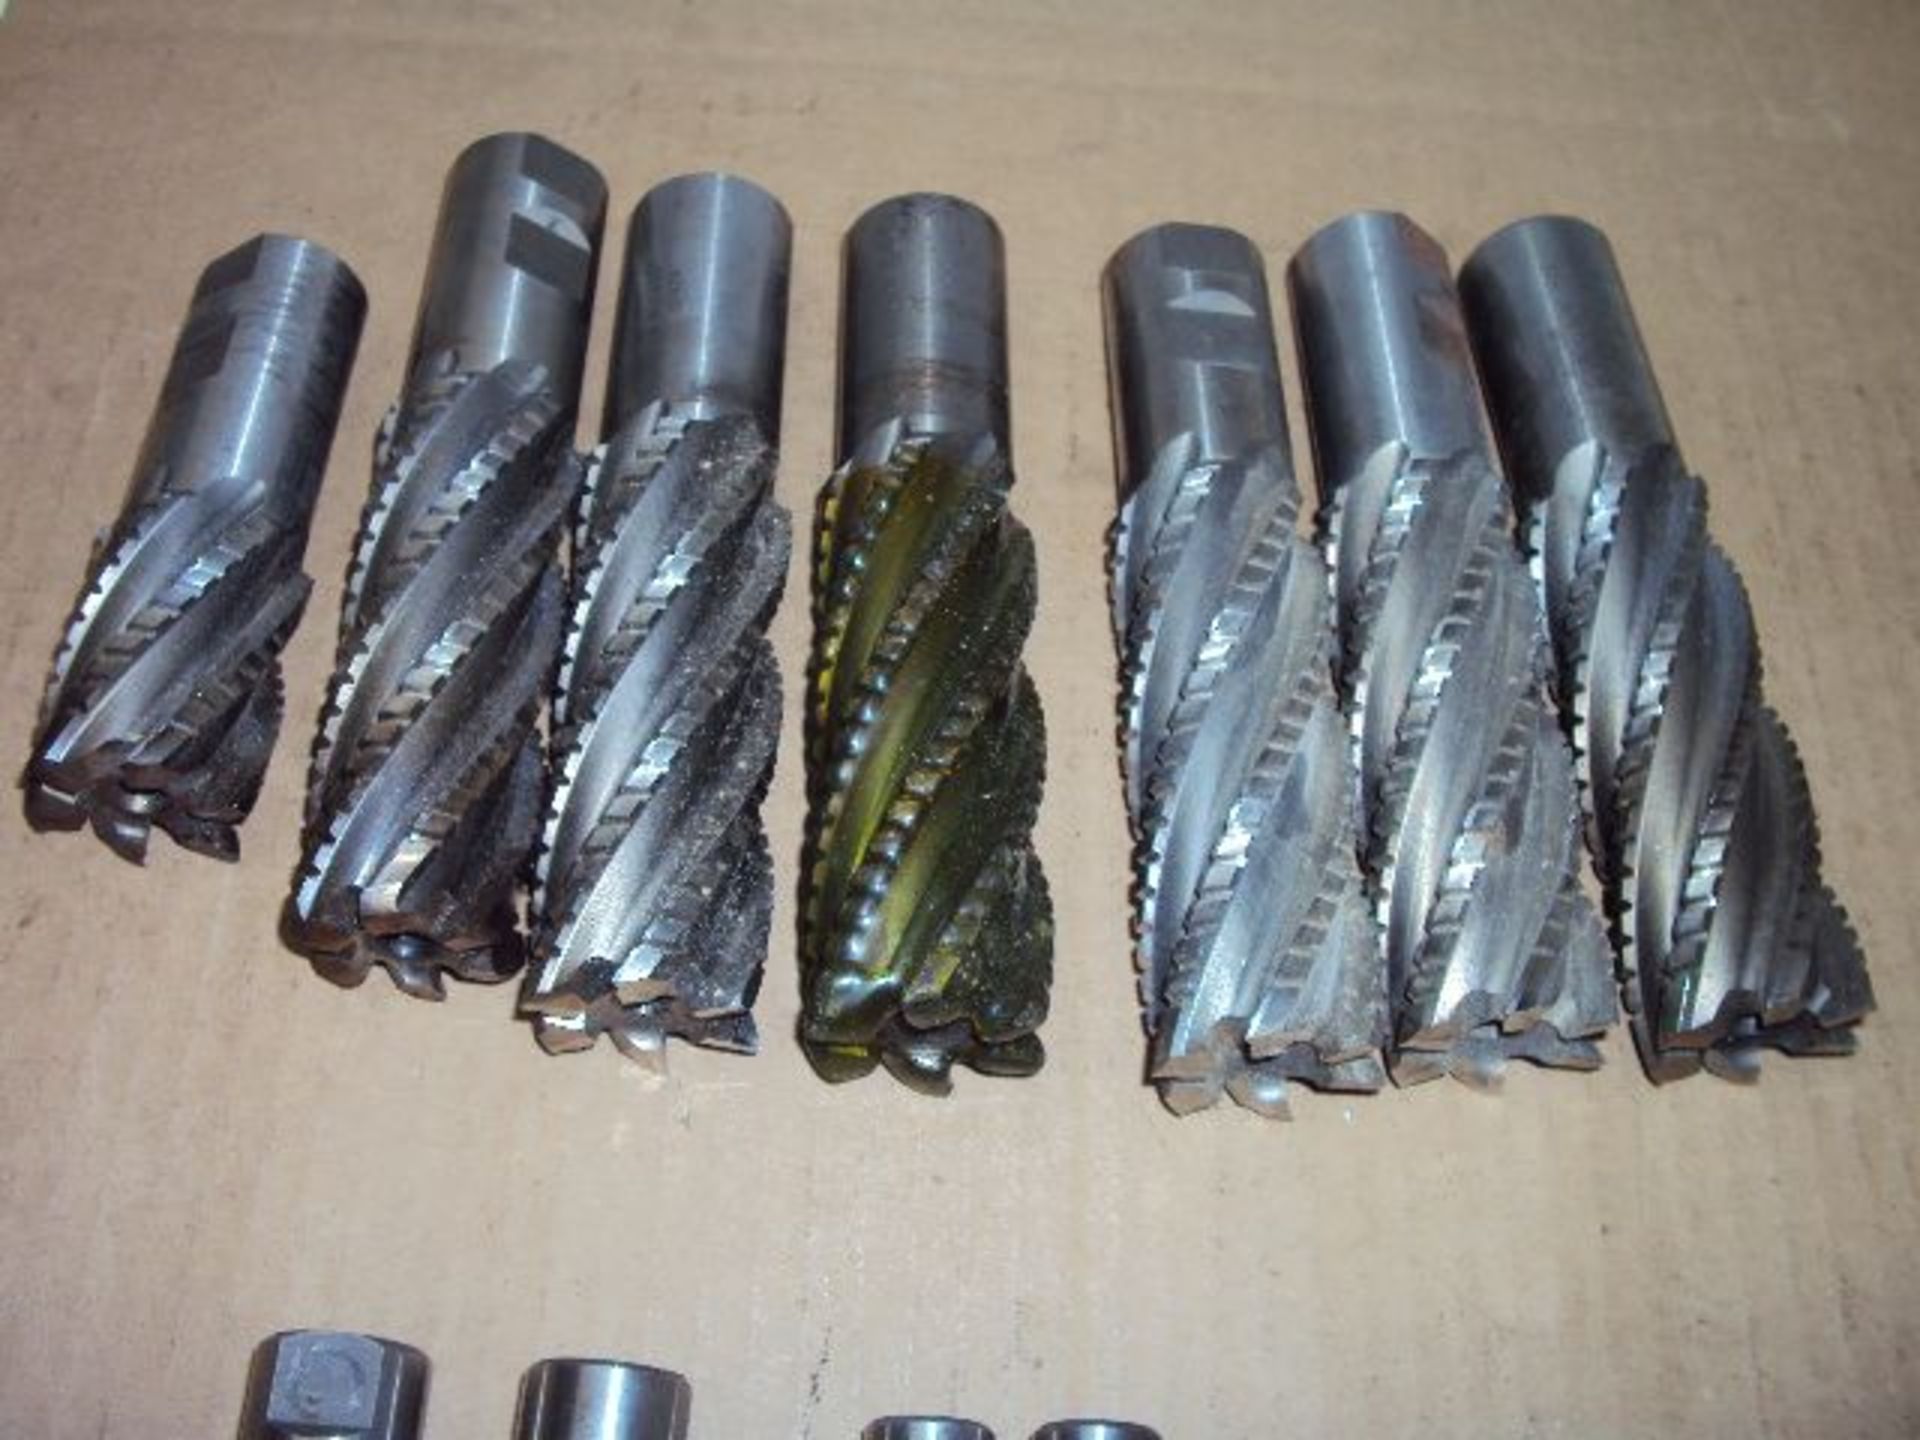 (16) Assorted HSS Roughing End Mills (3) 2”, (7) 1-1/2”, (2) 1”, (2) 3/4”, (2) 1/2” - Image 3 of 7